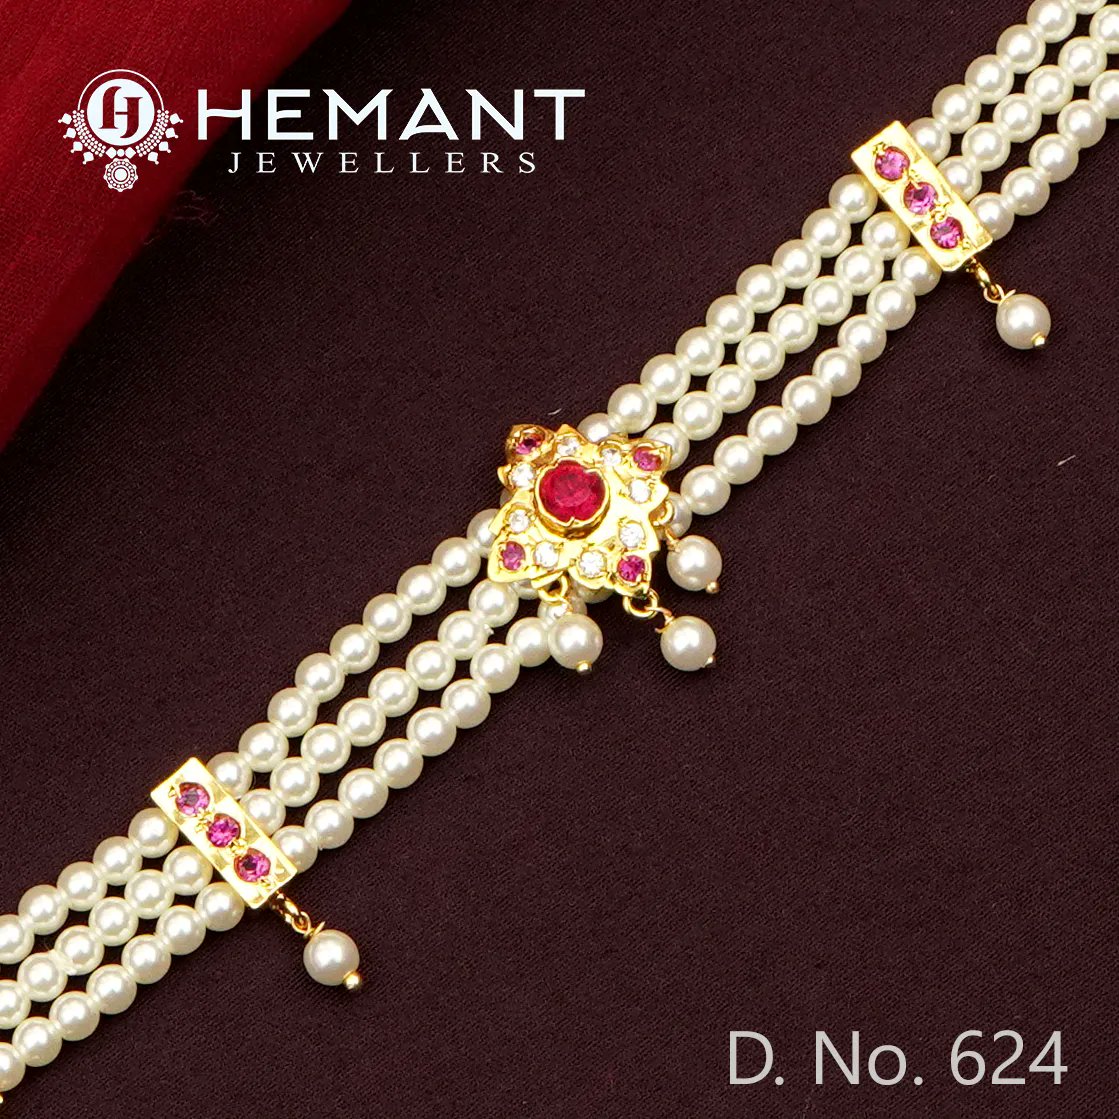 Pearl Necklace : Buy Pearl Necklace Online at Best Price | Hemant Jewellers 
📲 Website link in bio. 
Also subscribe our youtube channel:- Hemant Jewellers Official 
#pearljewellery #bracelet #baroquepearl #baroquenecklace #kalungbatualam #fashion #gold #earrings #necklace